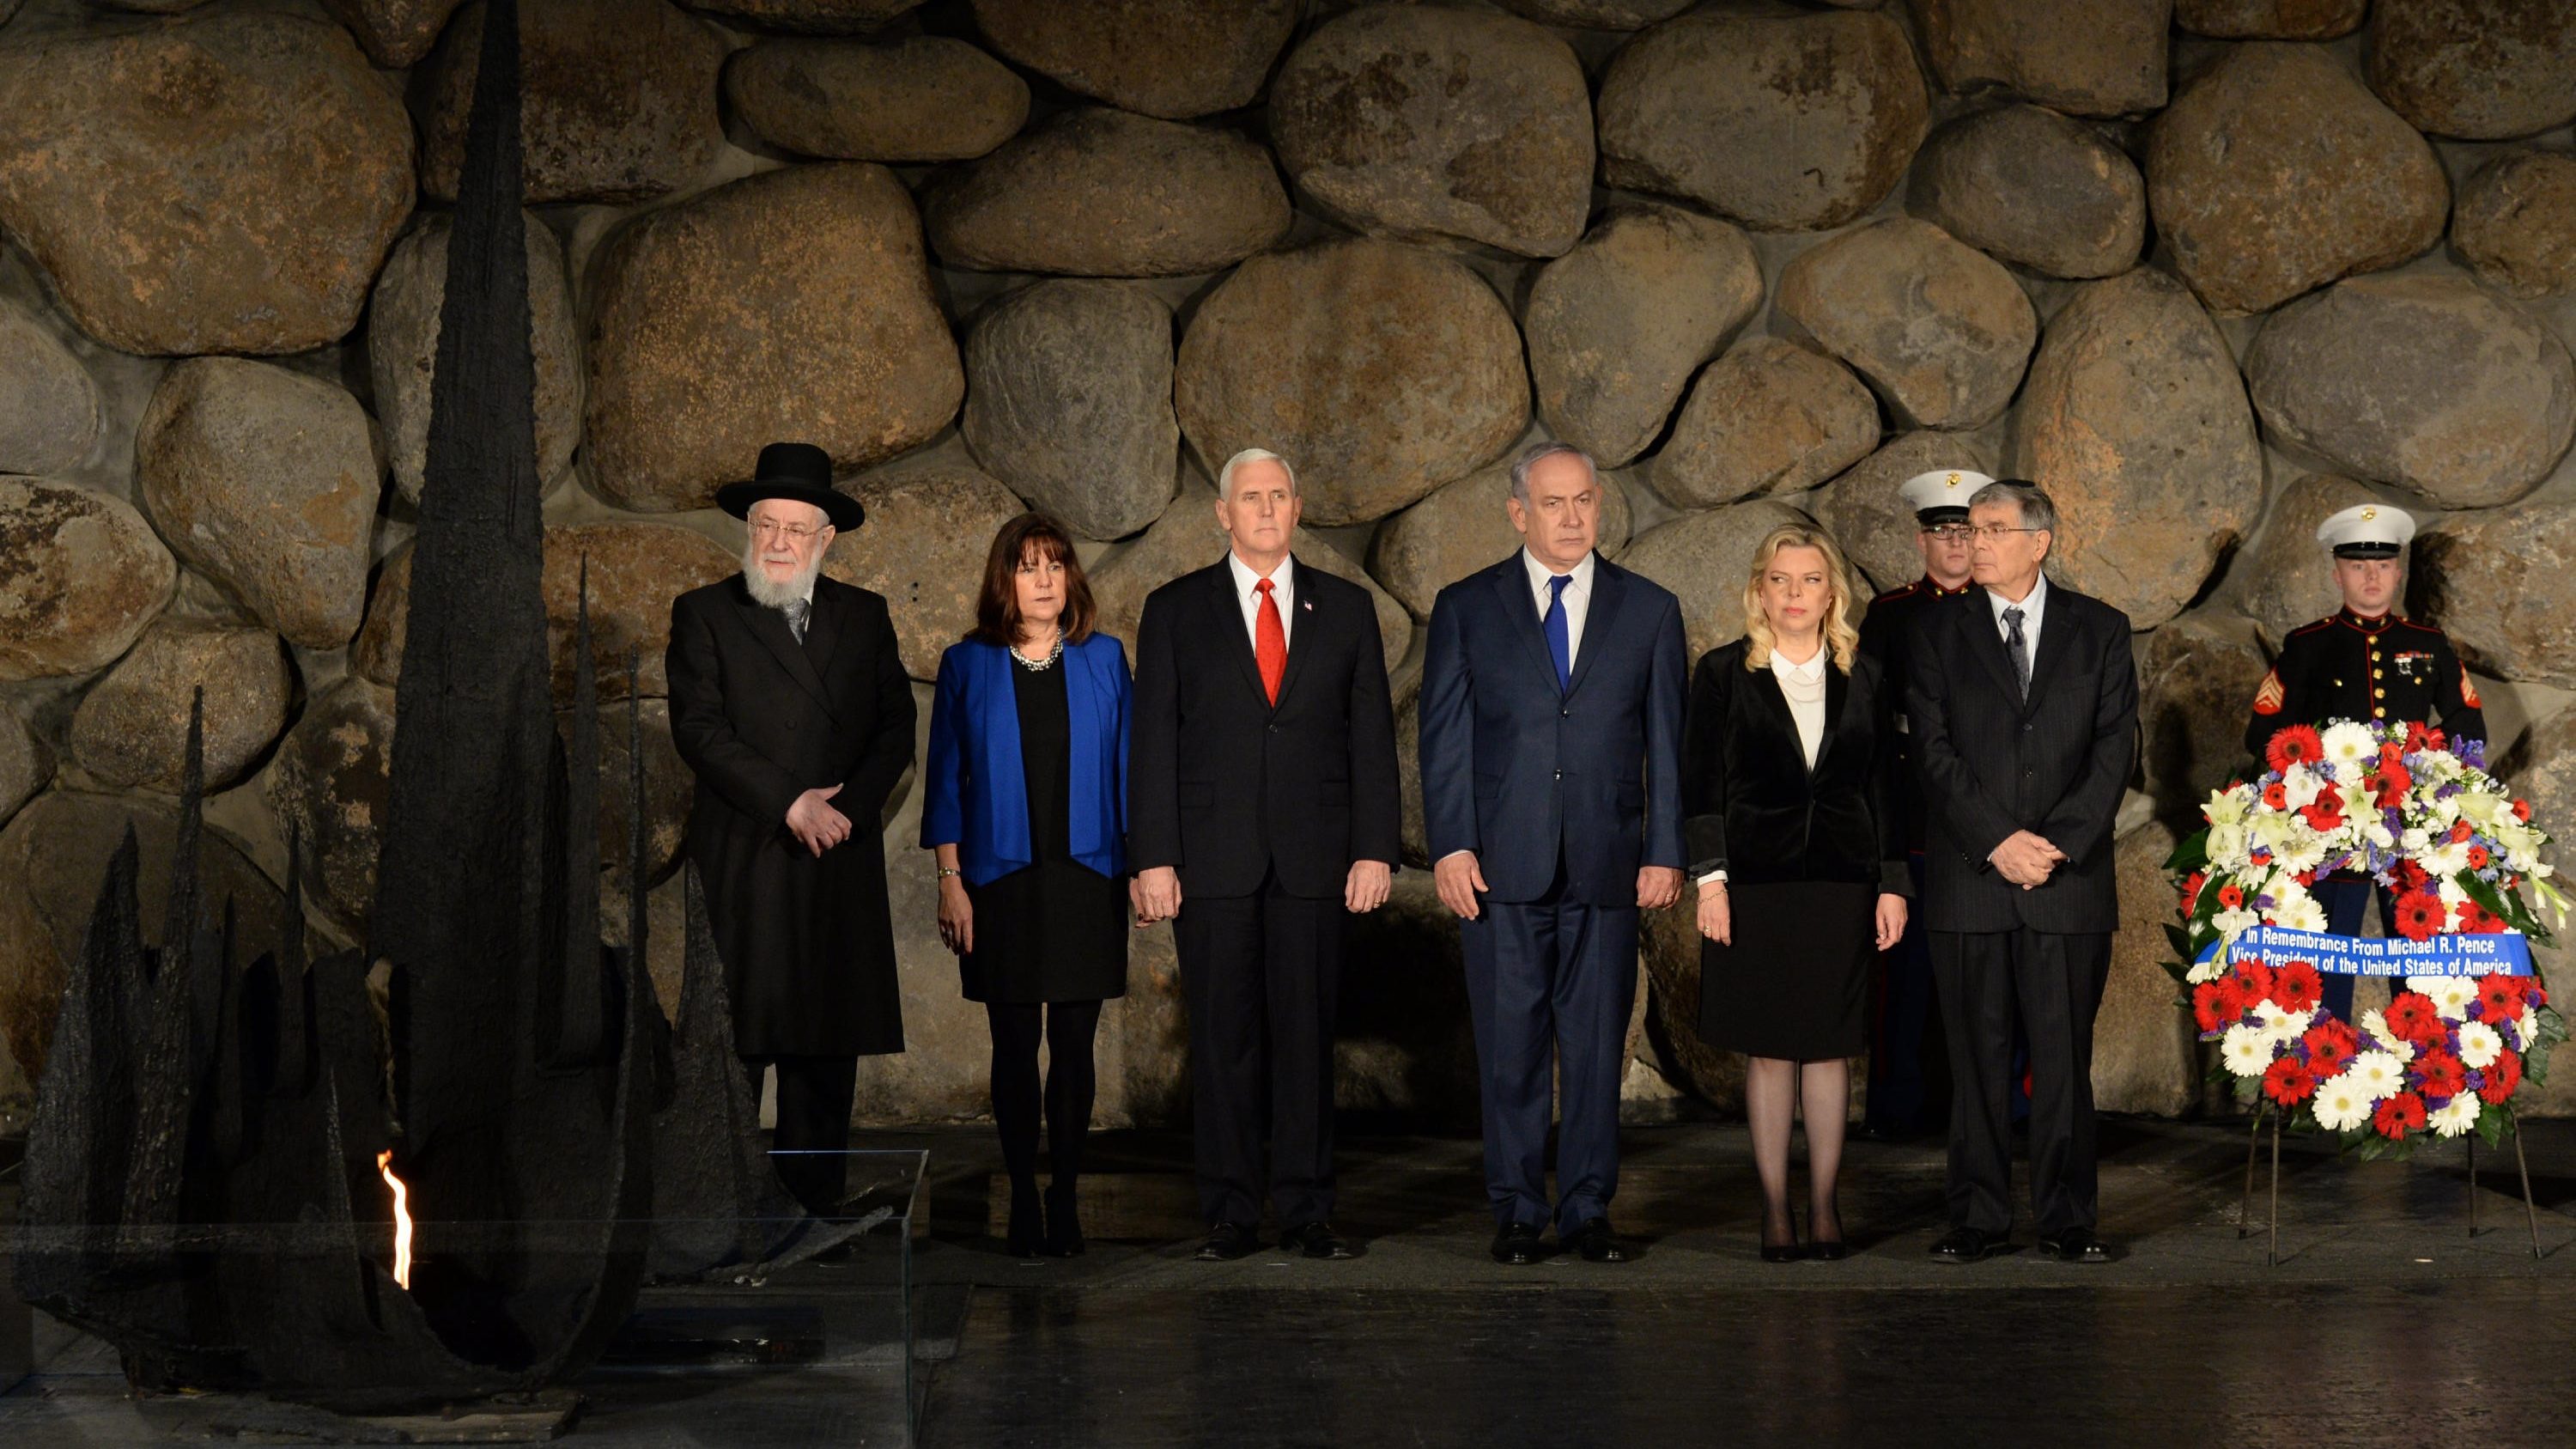 As World Leaders Descend on Israel, Iran Tensions Fit into Holocaust Theme